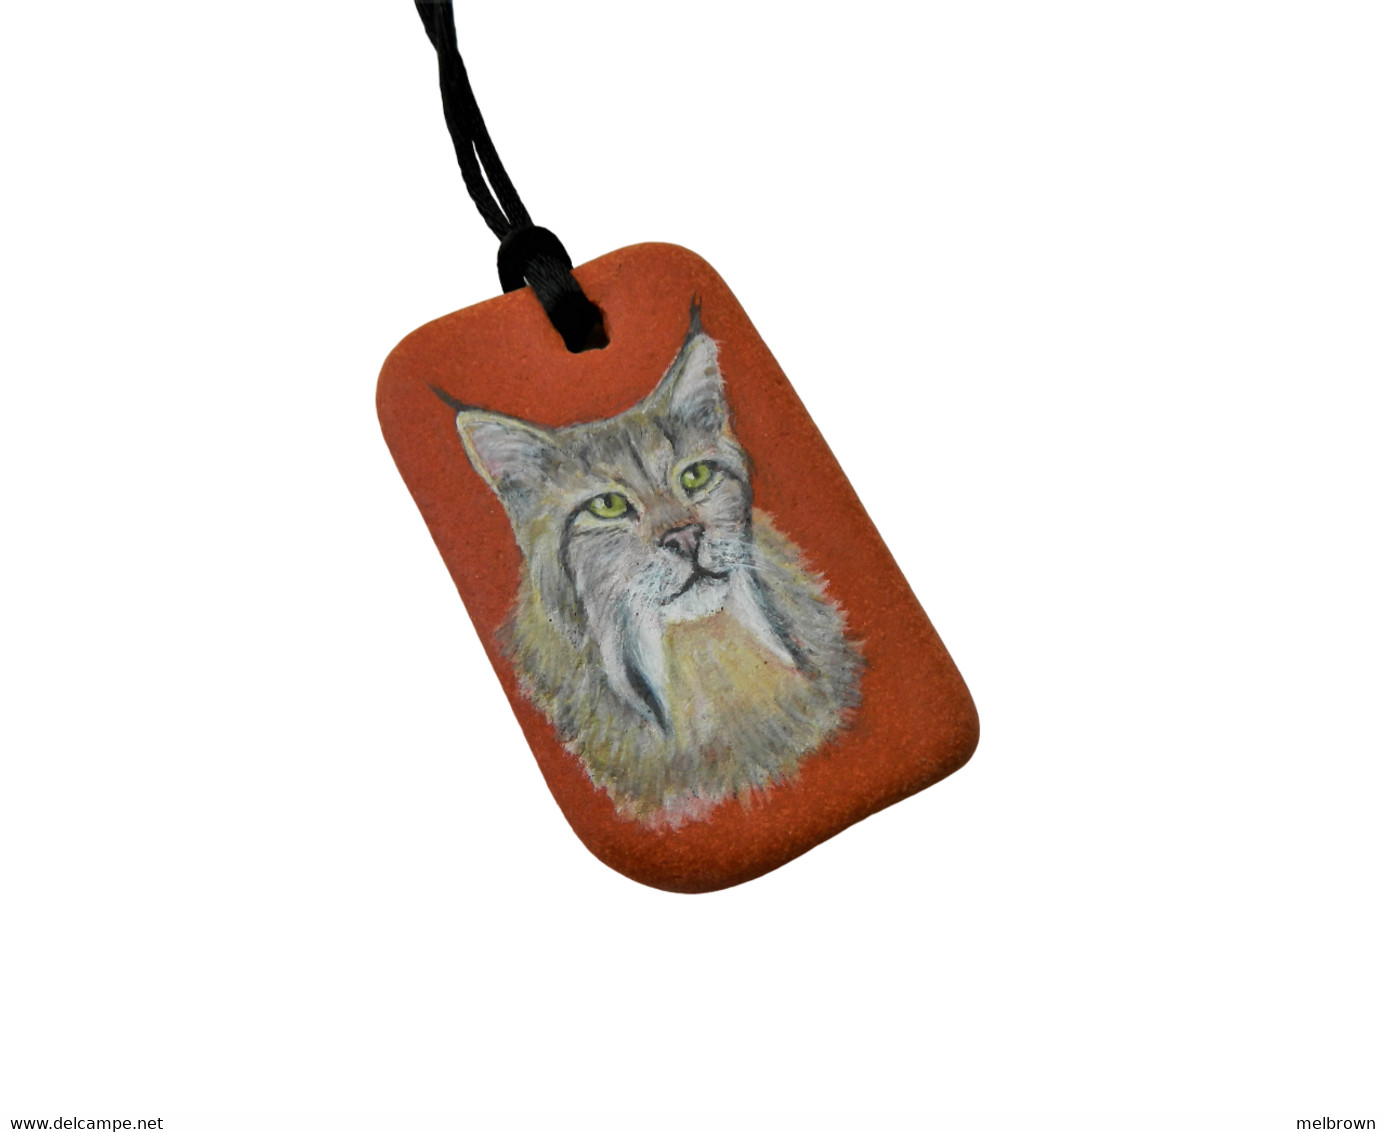 LYNX Cat Hand Painted On A Sea-Worn Terracotta Tile Pendant - Animaux